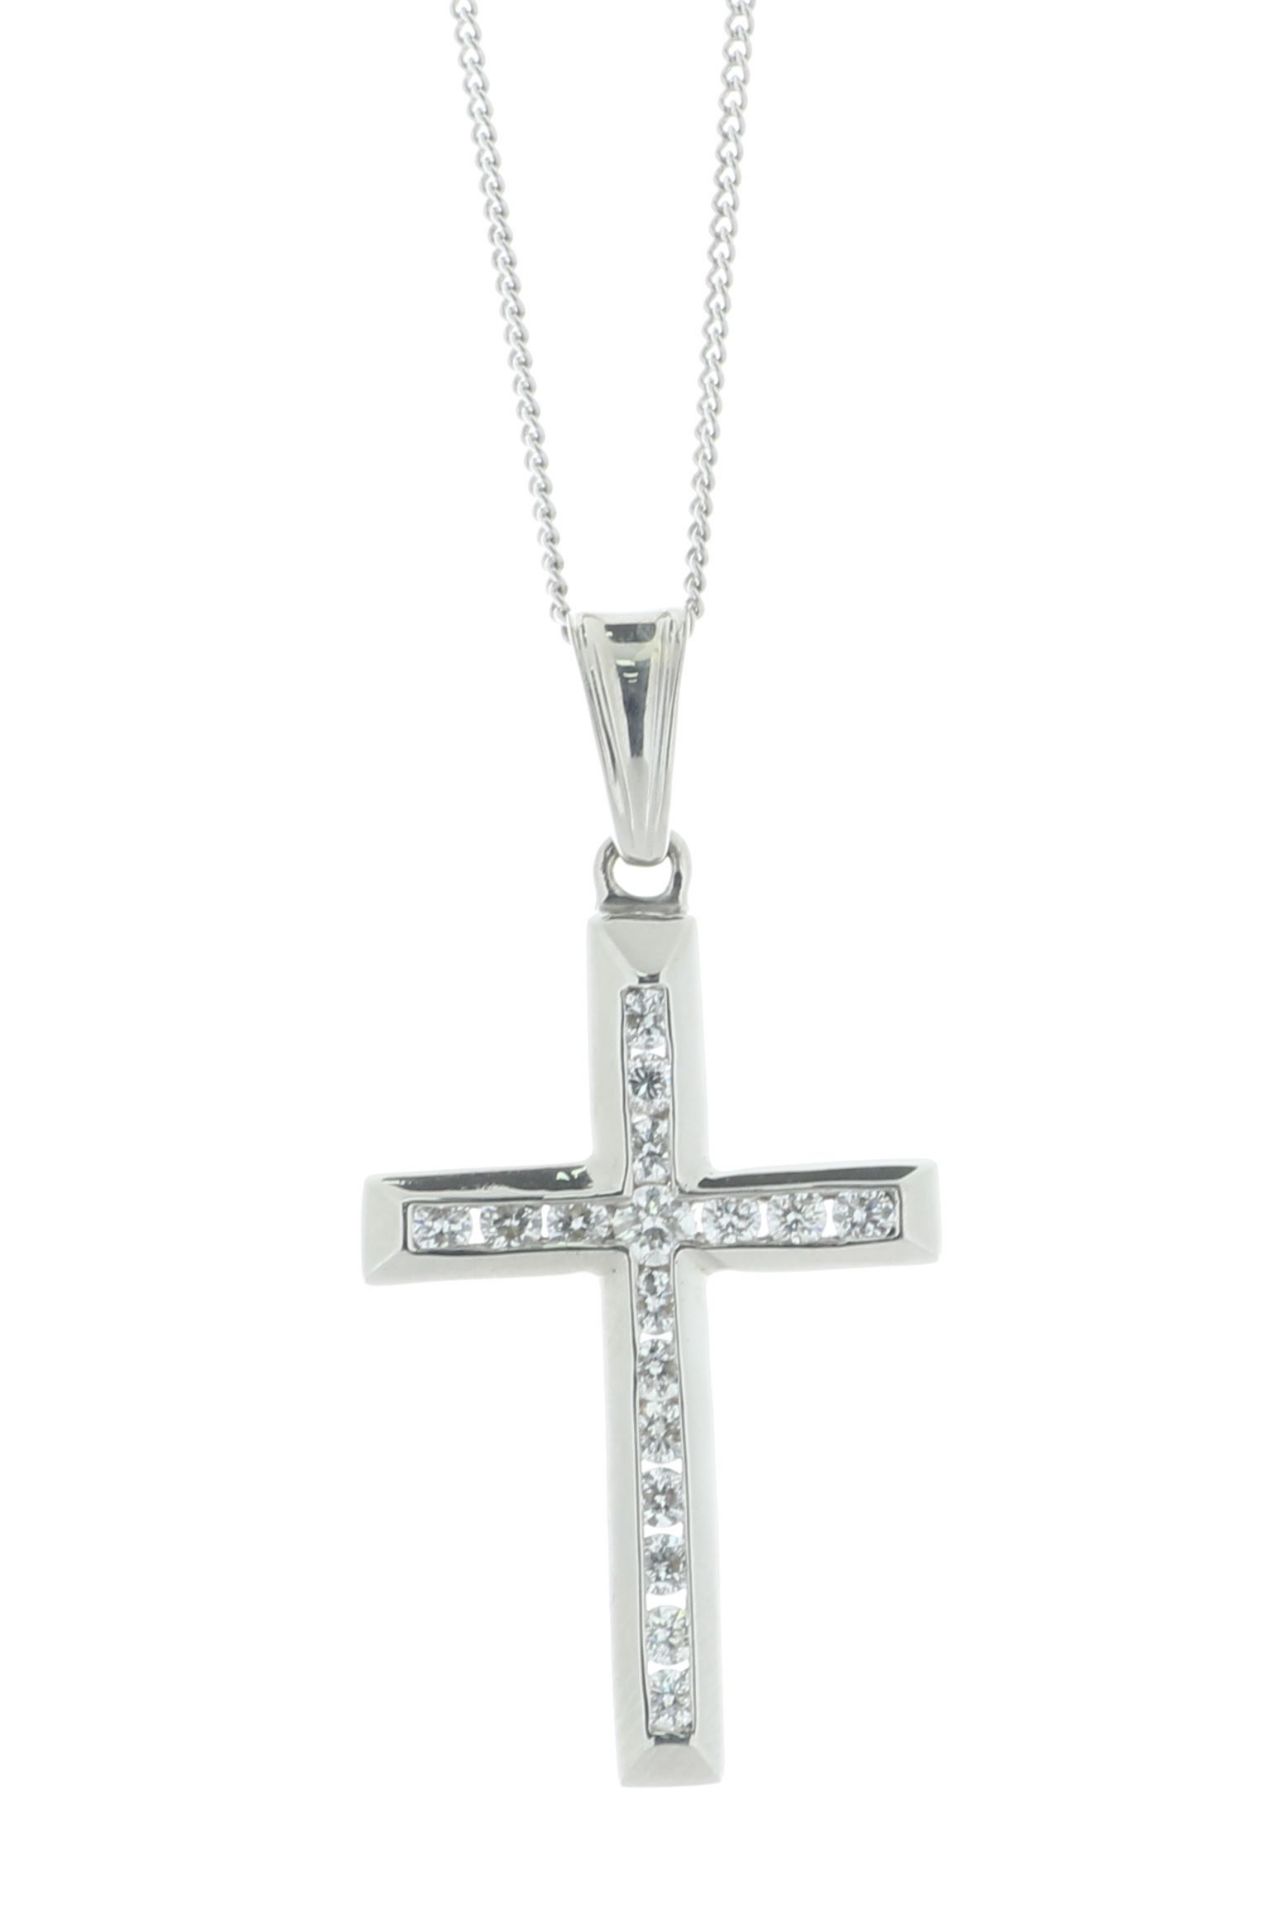 10ct Gold Cross Diamond Pendant And 18" Chain 0.60 Carats - Valued By AGI £3,770.00 - A gorgeous